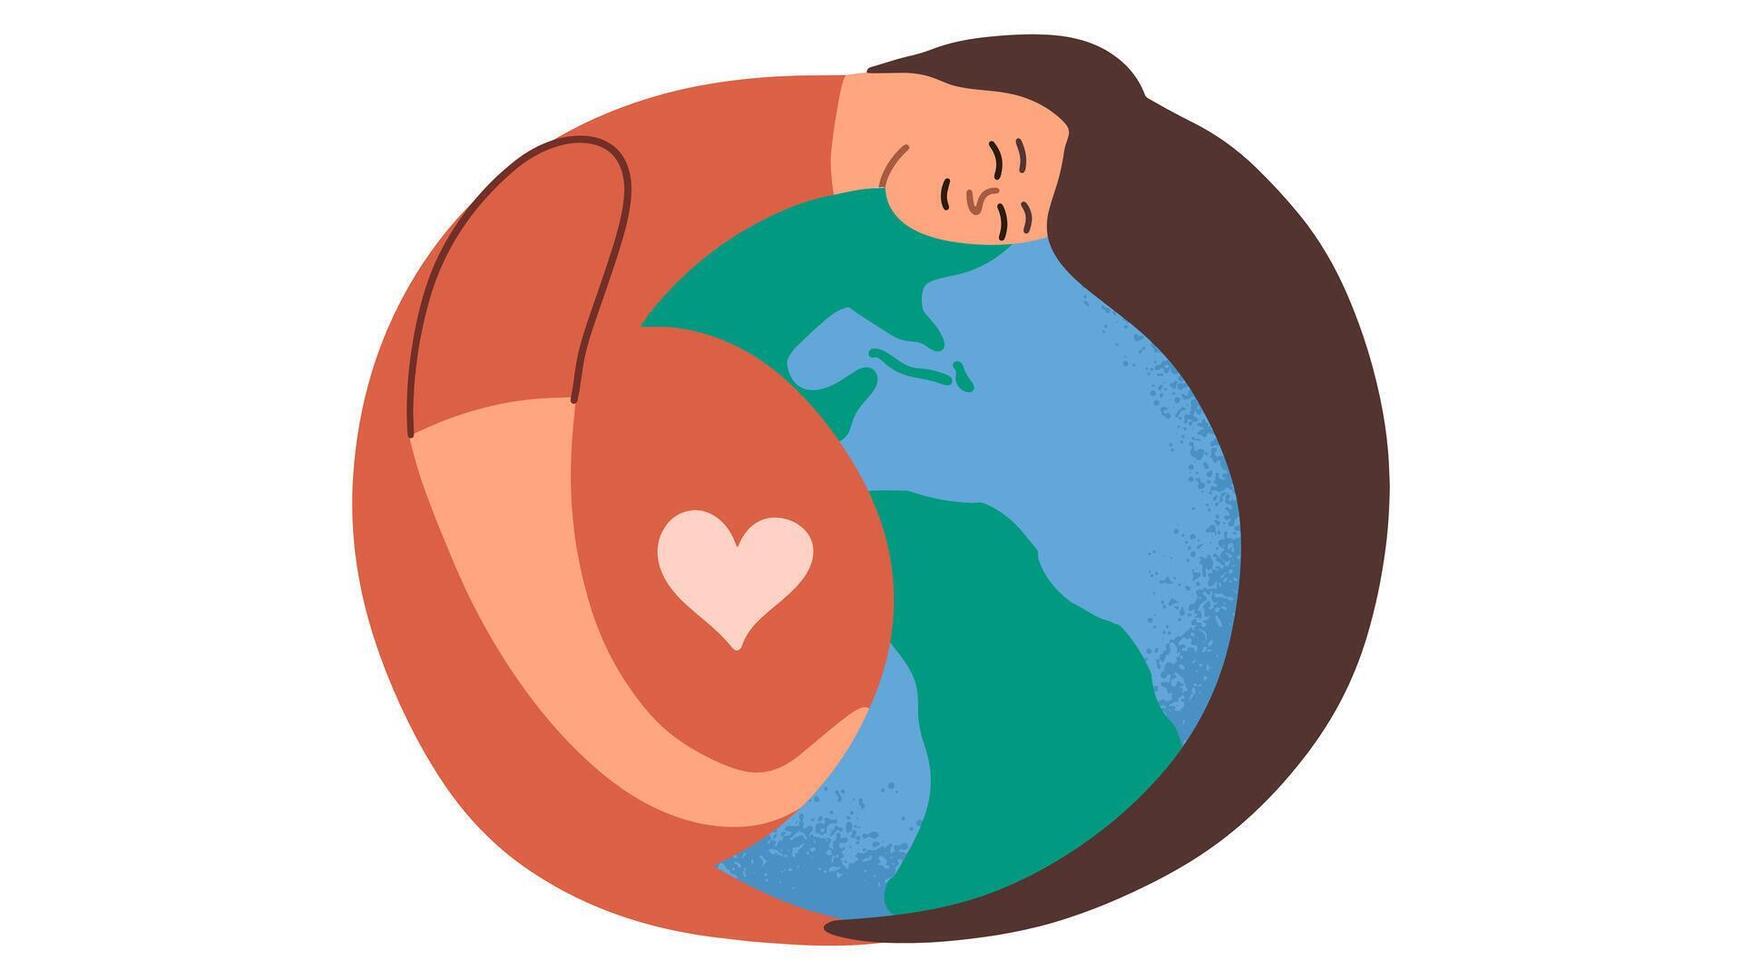 Protecting the environment, planet, ecology concept hand draw illustration. Pregnancy woman holding a planet in her hands. vector